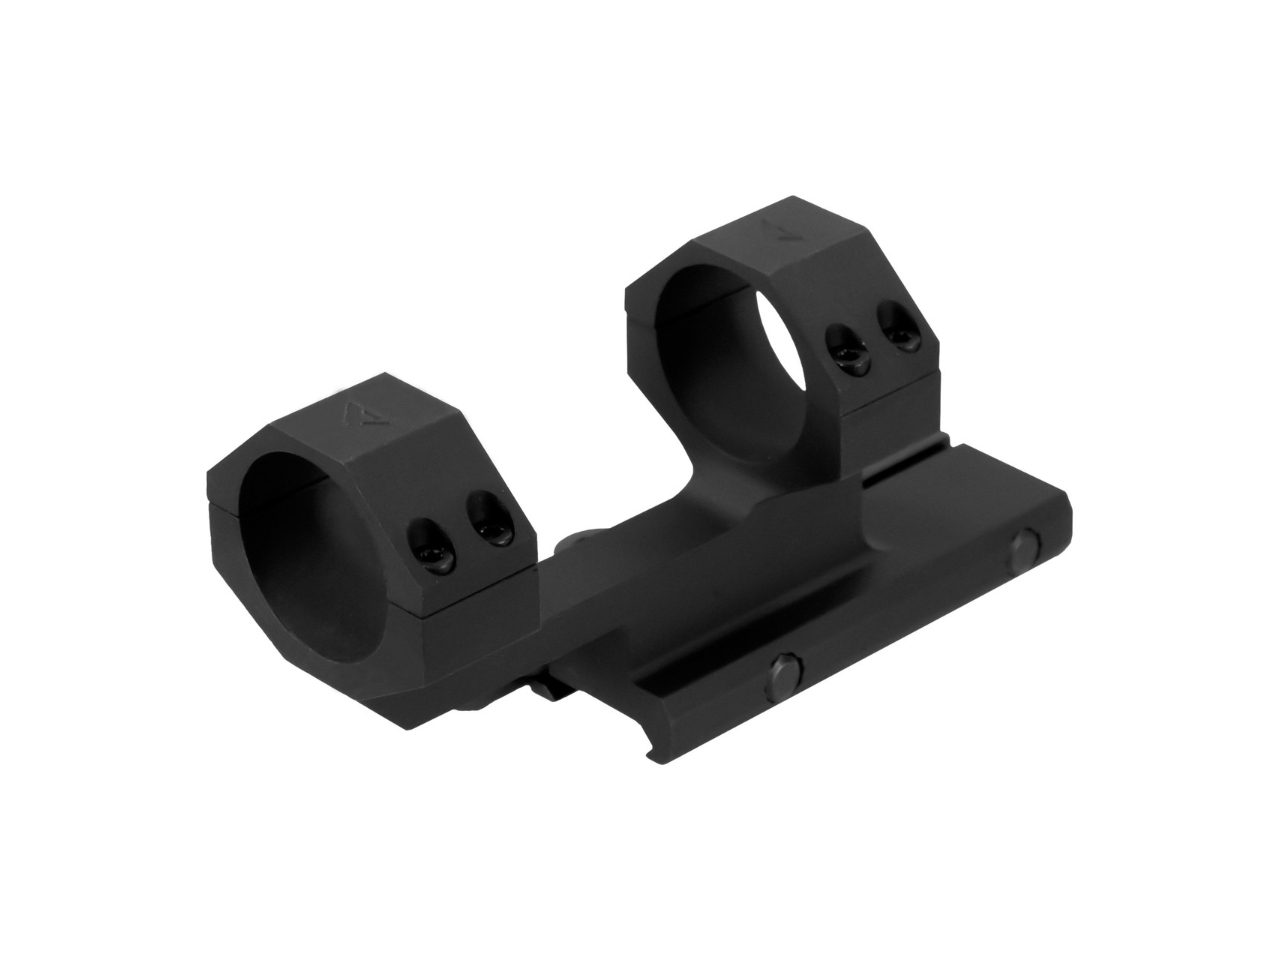 Photos - Other AIM Sports AIM 30mm QD Cantilever Scope Mount 1.75 Height 815879018403